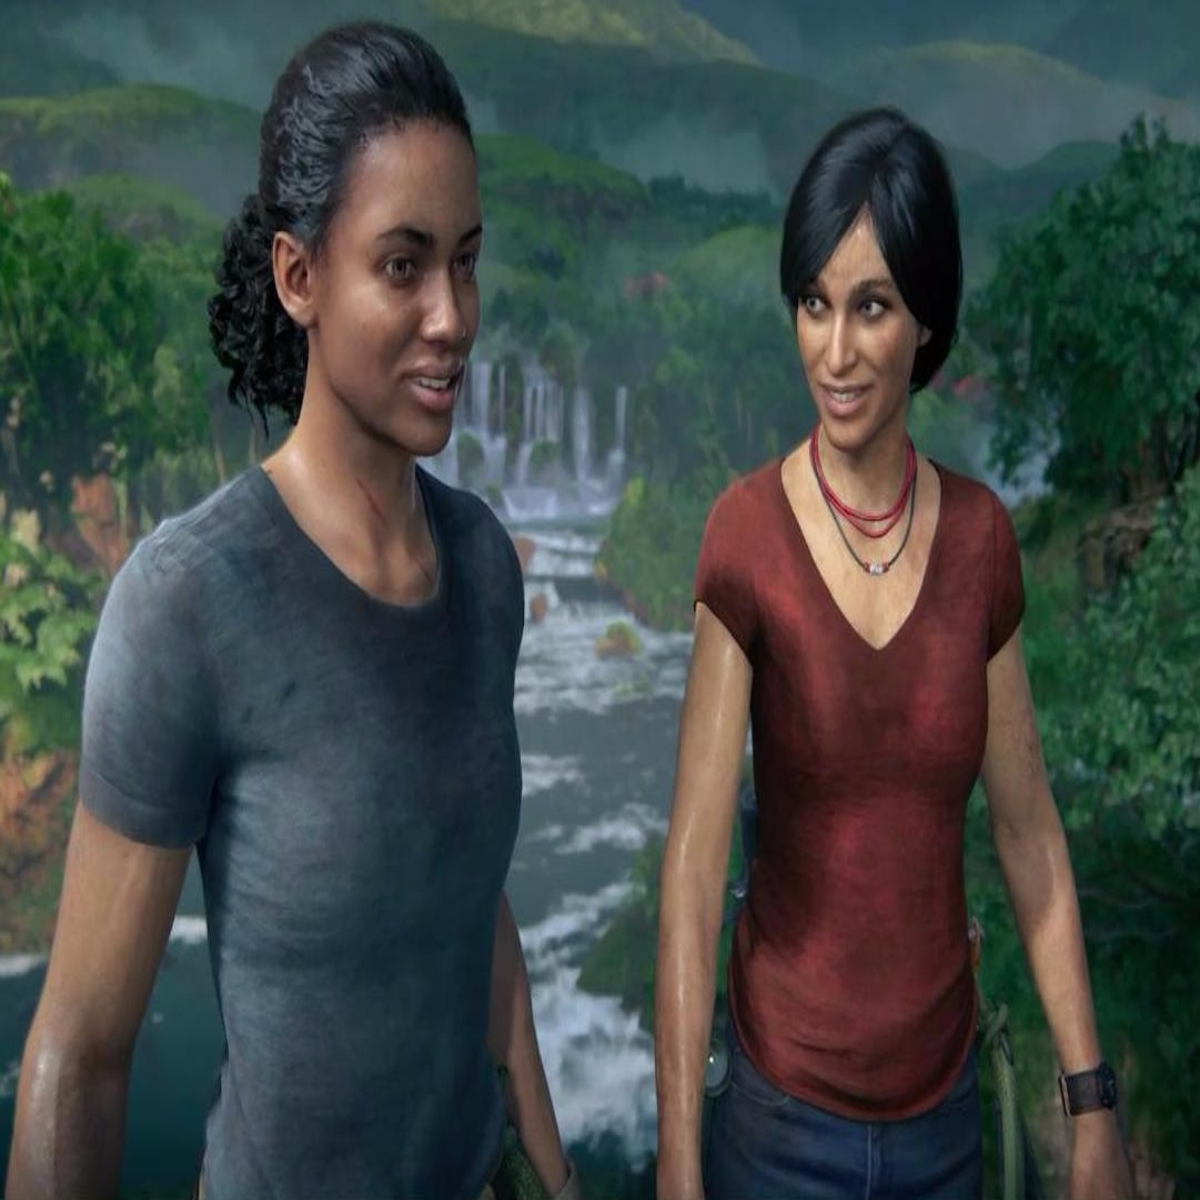 Eurogamer - Uncharted: The Lost Legacy looks beautiful at